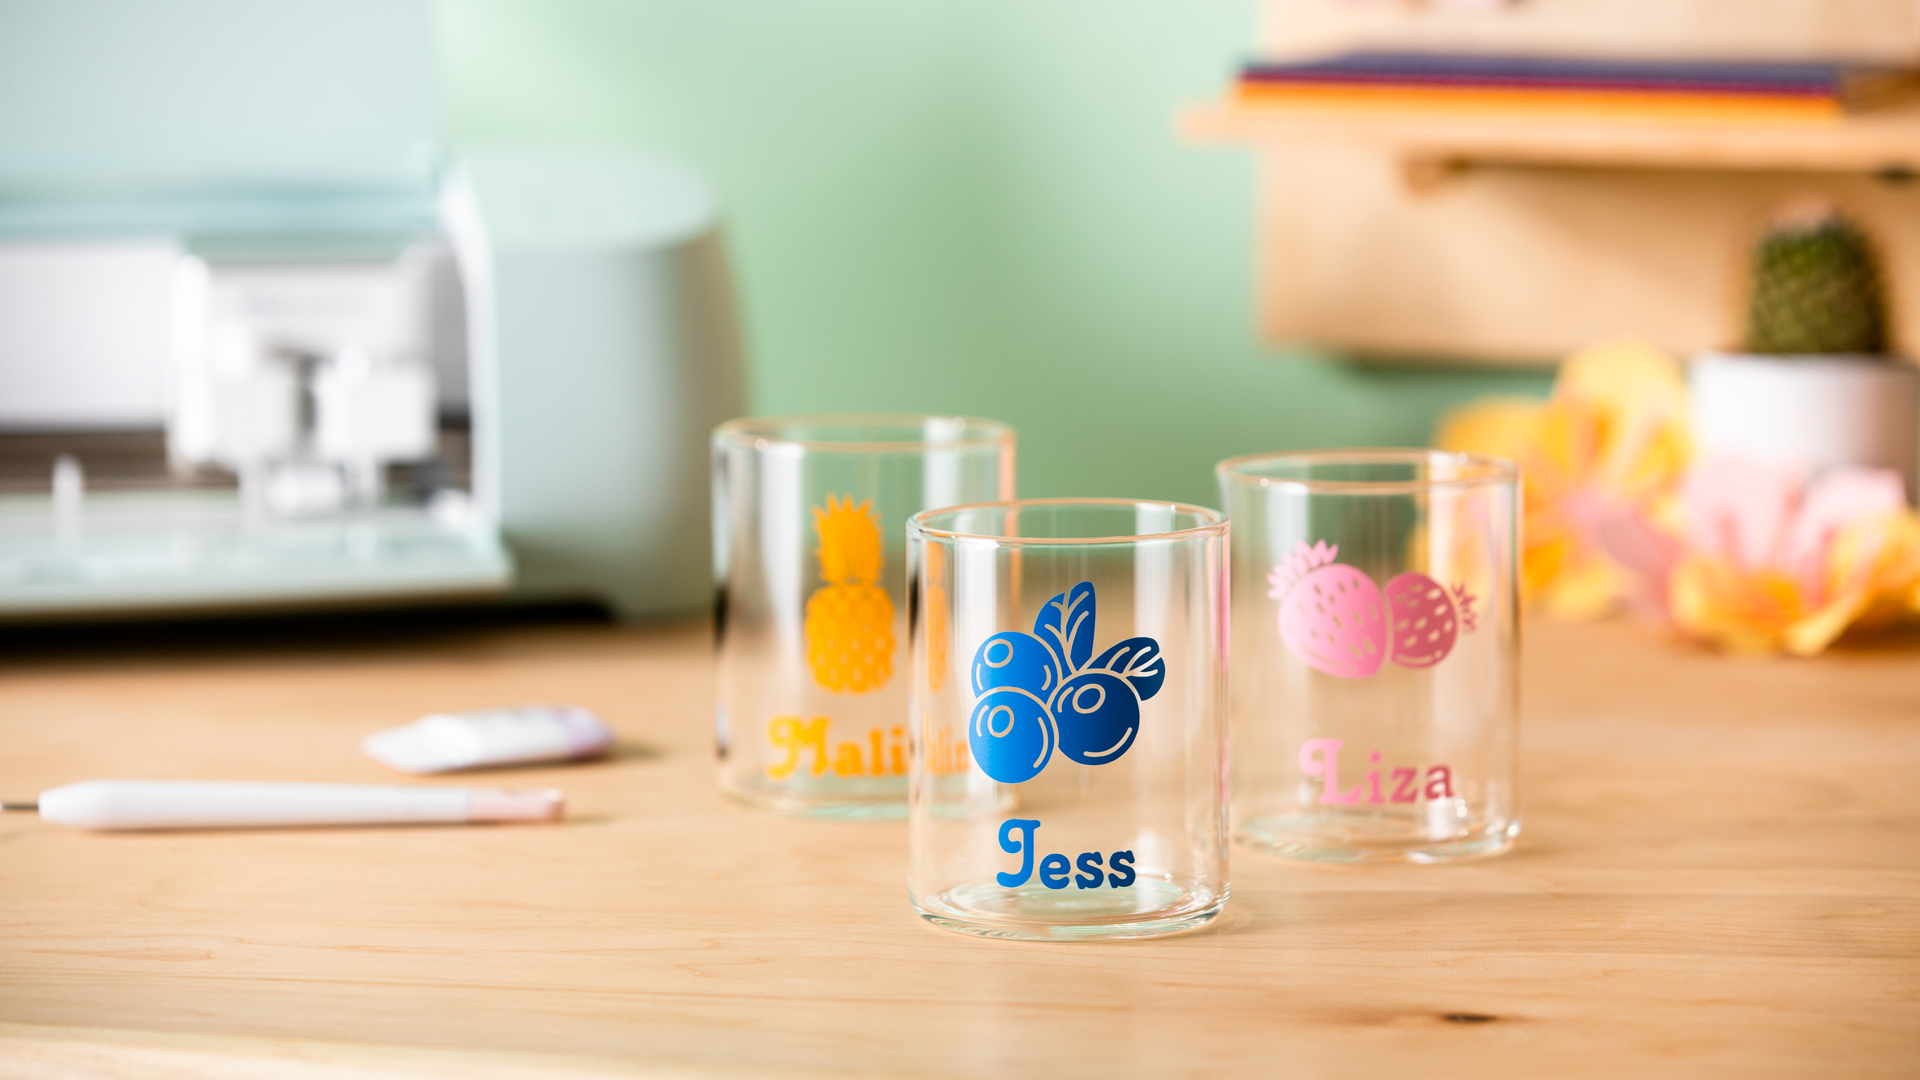 Finished personalized glassware sitting on wood table with Cricut cutting machine in background